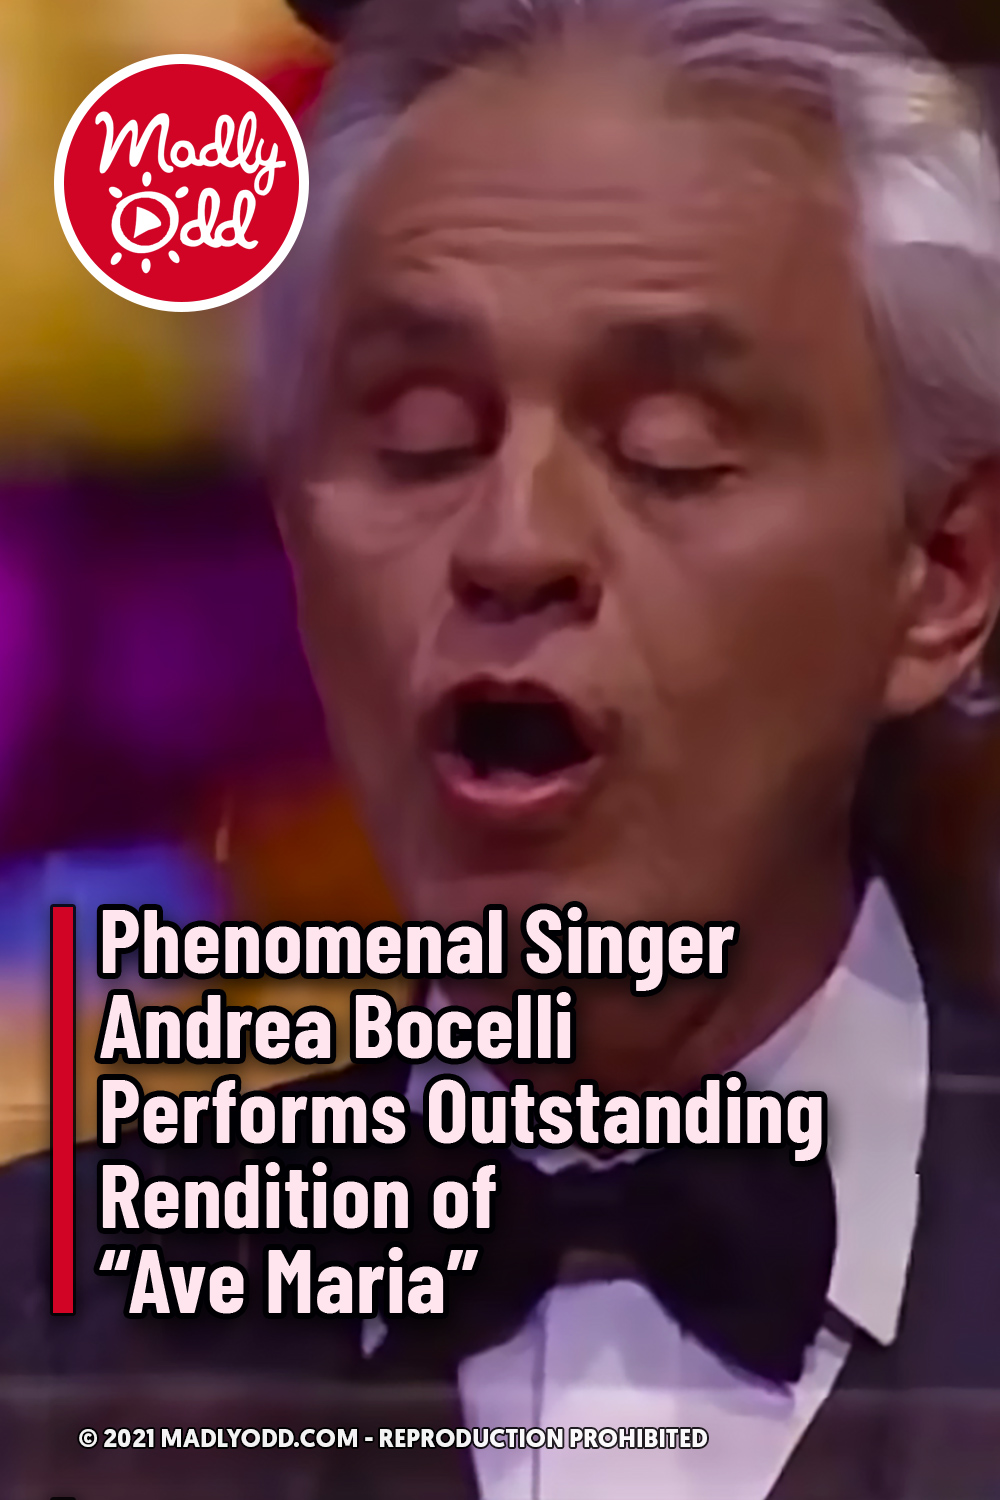 Phenomenal Singer Andrea Bocelli Performs Outstanding Rendition of “Ave Maria”